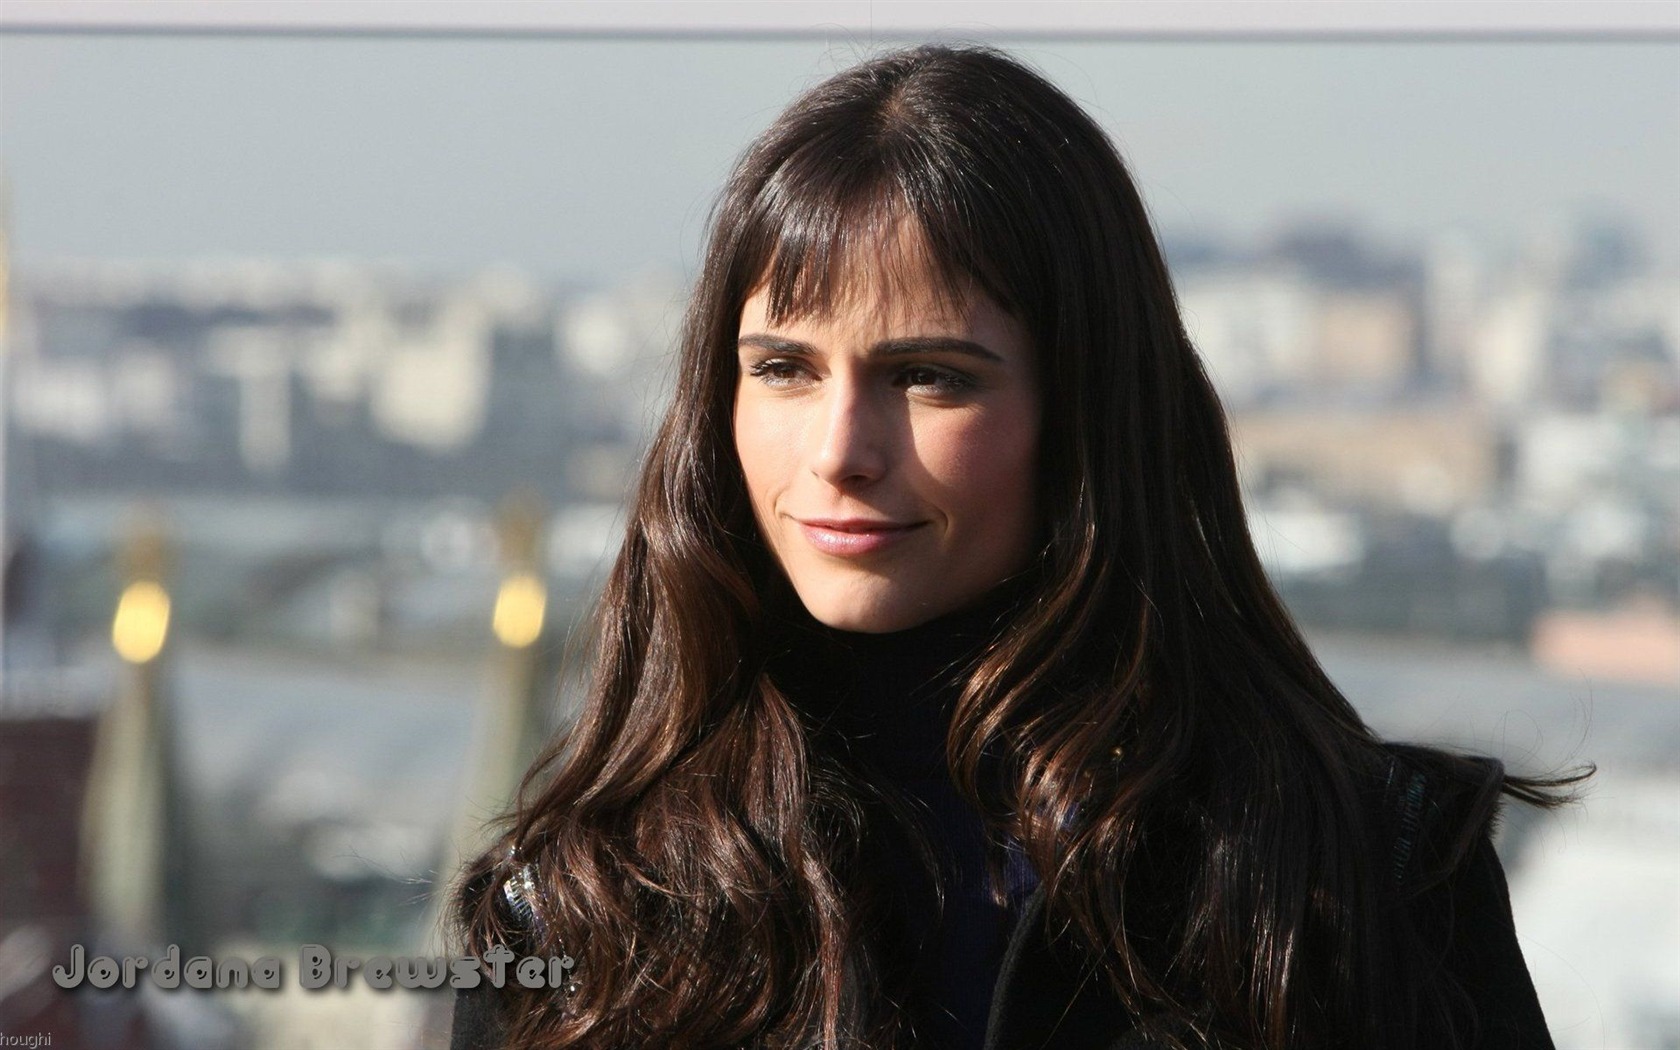 Jordana Brewster #018 - 1680x1050 Wallpapers Pictures Photos Images